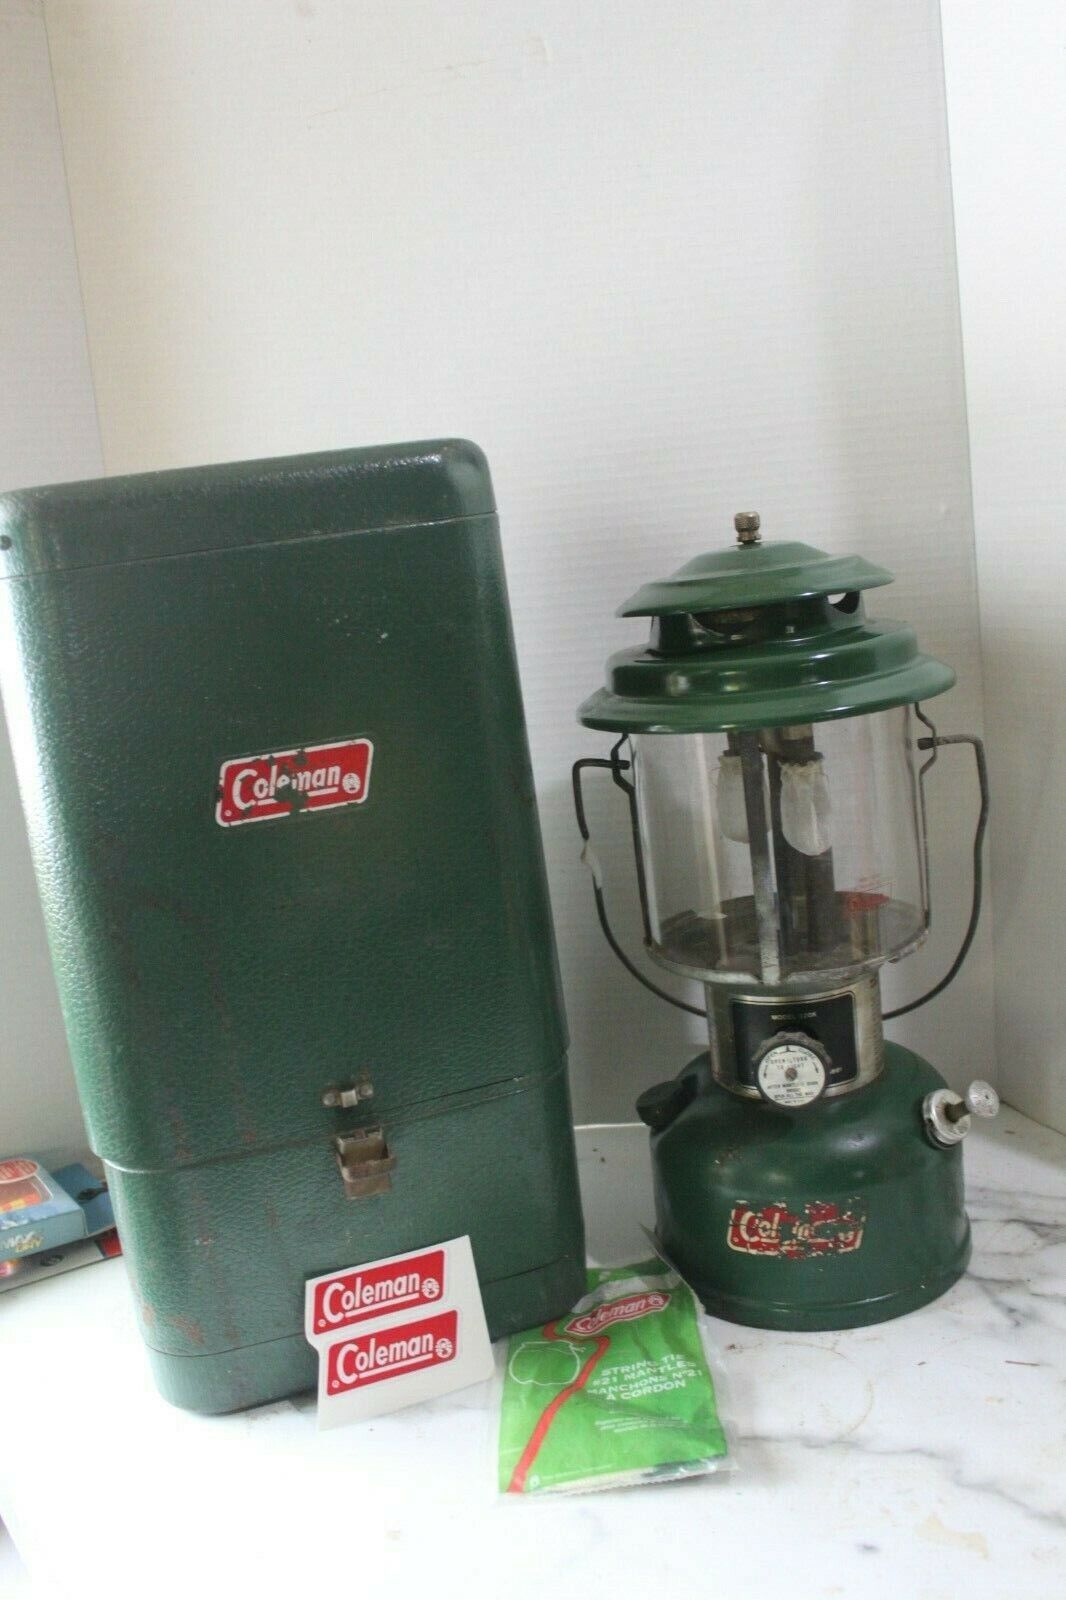 COLEMAN 220K LANTERN WITH STEEL CLAMSHELL CASE APRIL 1980 4 - 80 *PLUS EXTRAS*